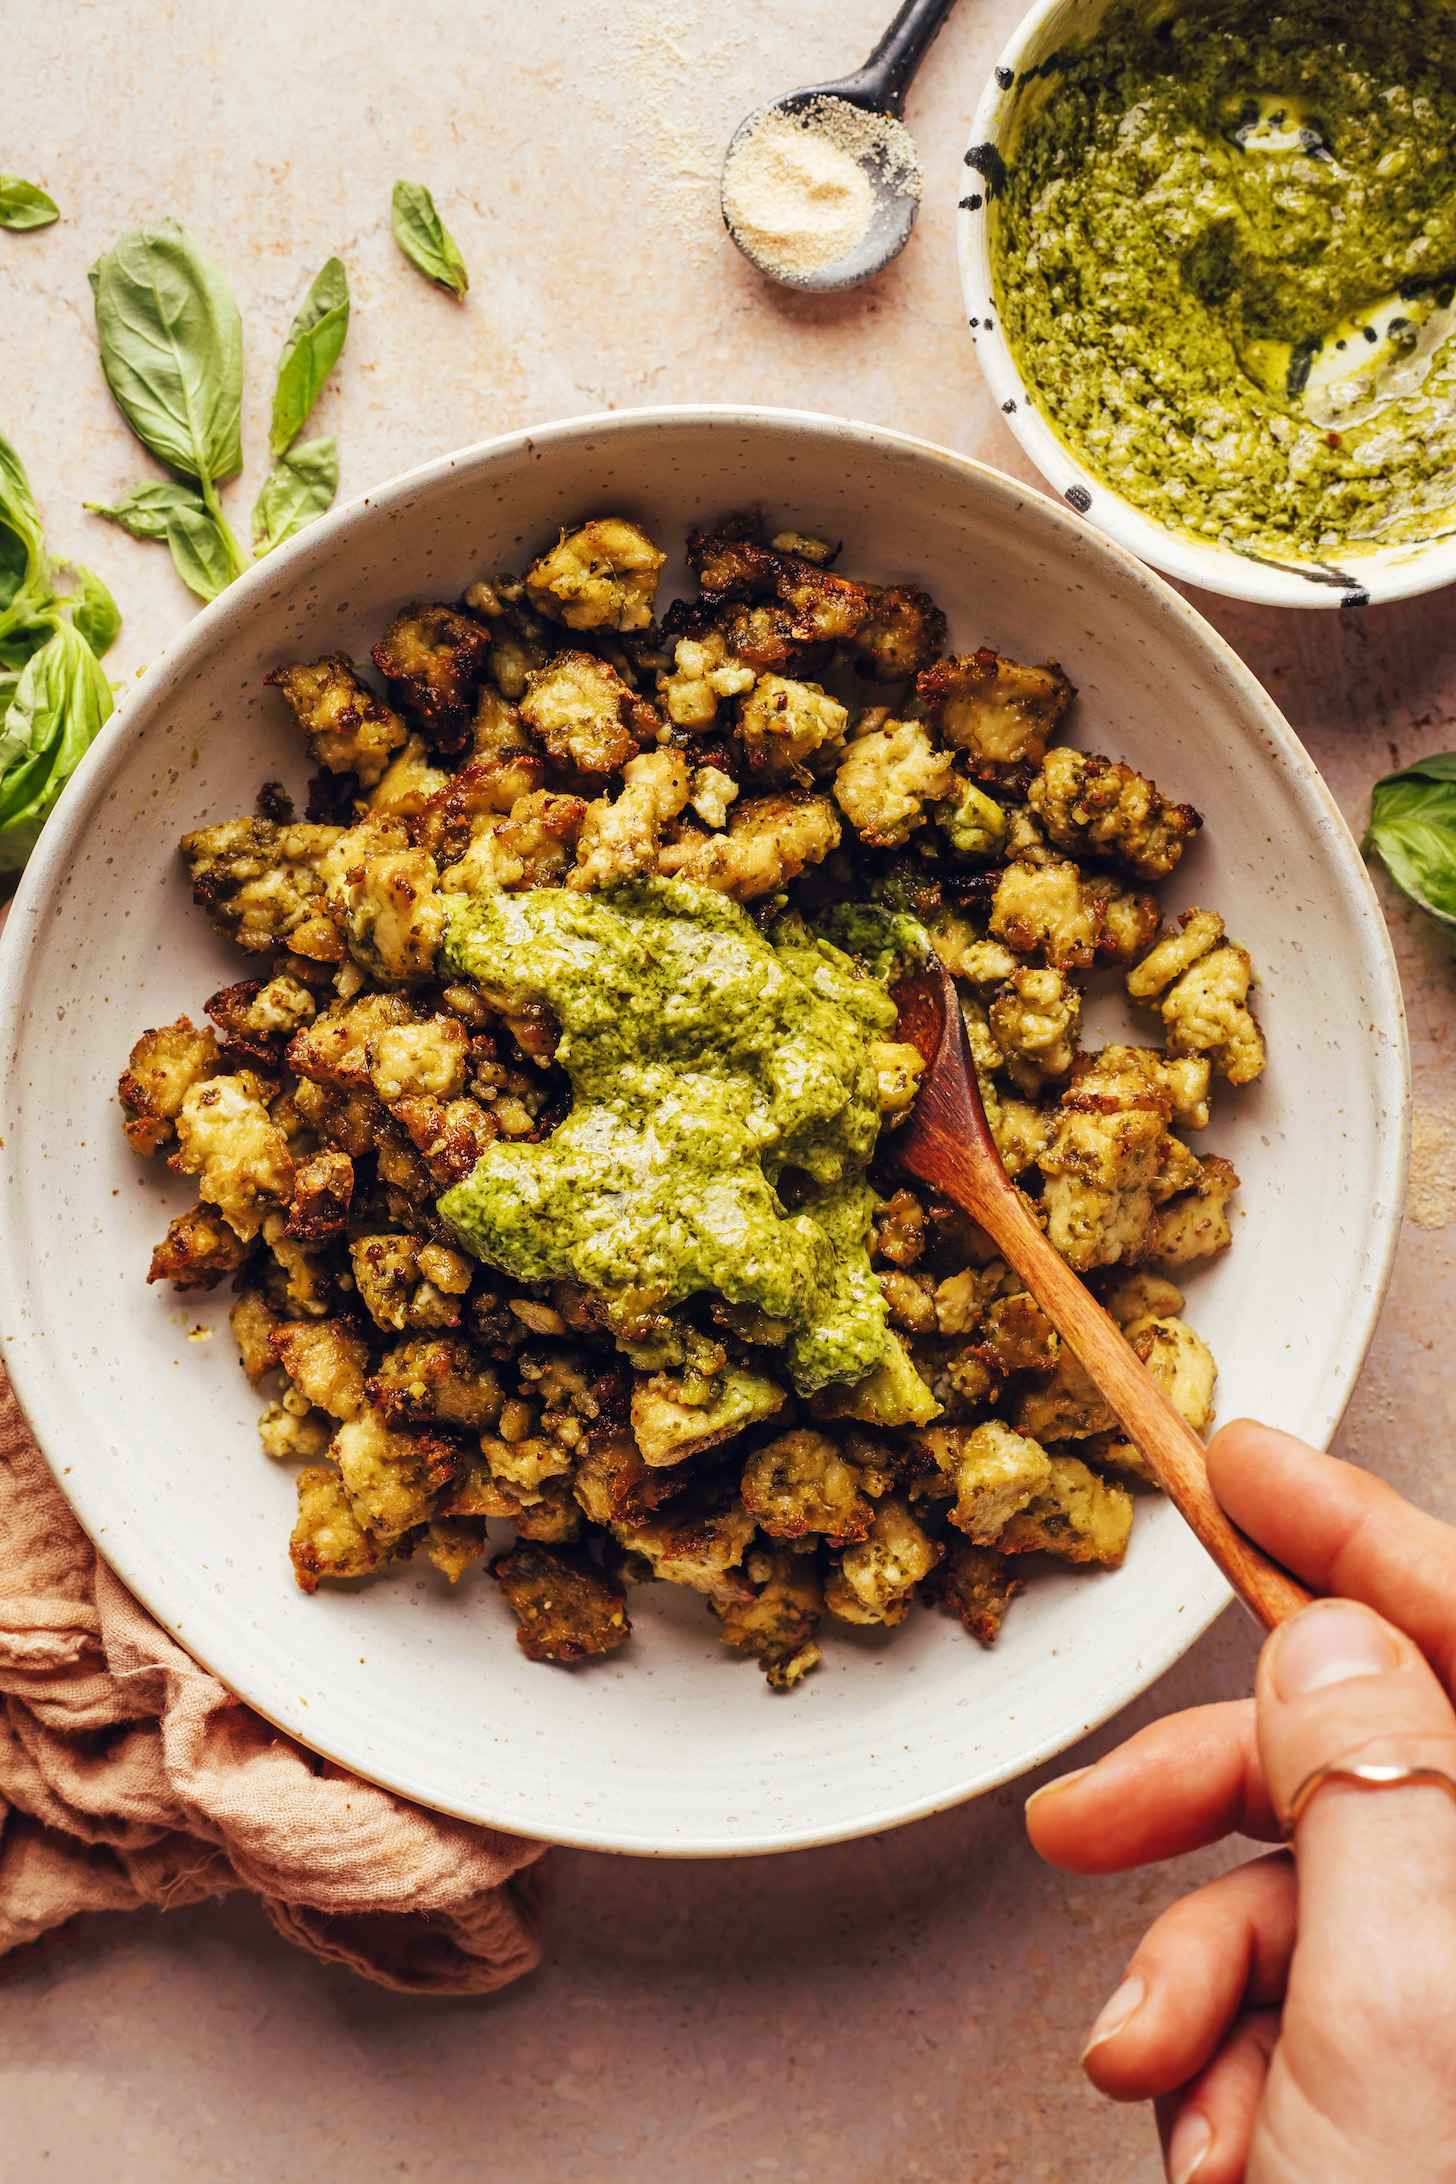 Mixing crispy baked tofu and pesto in a bowl